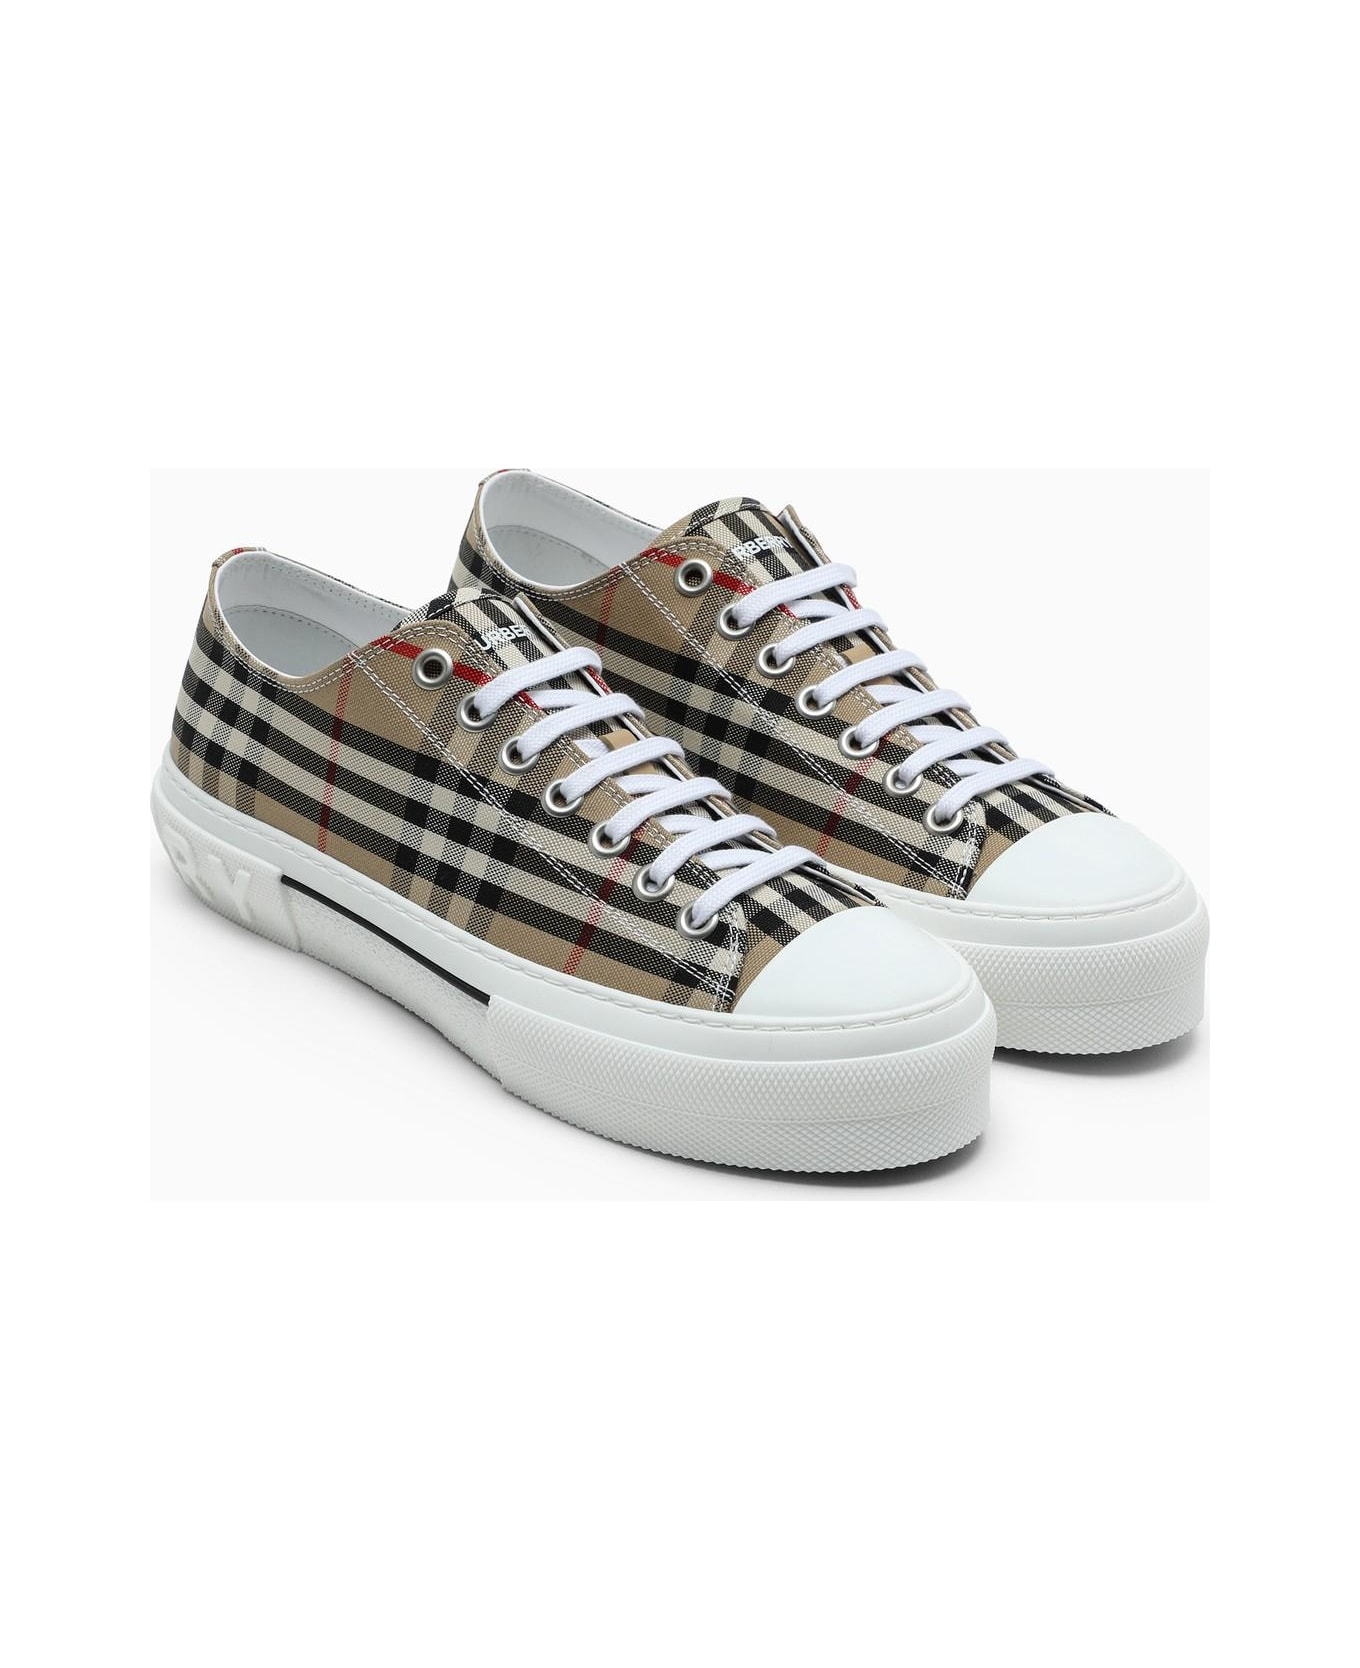 Burberry Beige Sneakers With Vintage Check Motif - NEUTRALS